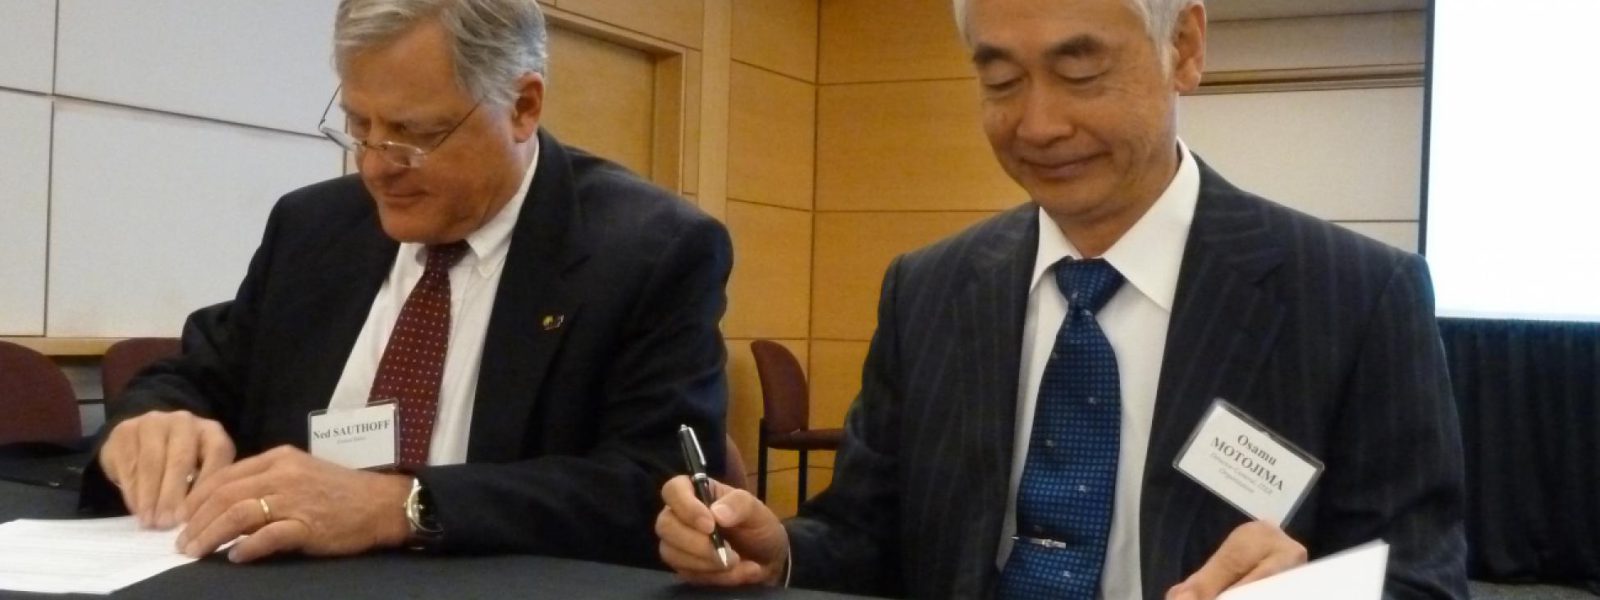 US ITER Project Manager Ned Sauthoff and ITER Director-General Osamu Motojima sign the low field side reflectometer Procurement Agreement on June 20, 2012 in Washington, DC. This diagnostic system will monitor electron density and aid assessment of fusion performance.